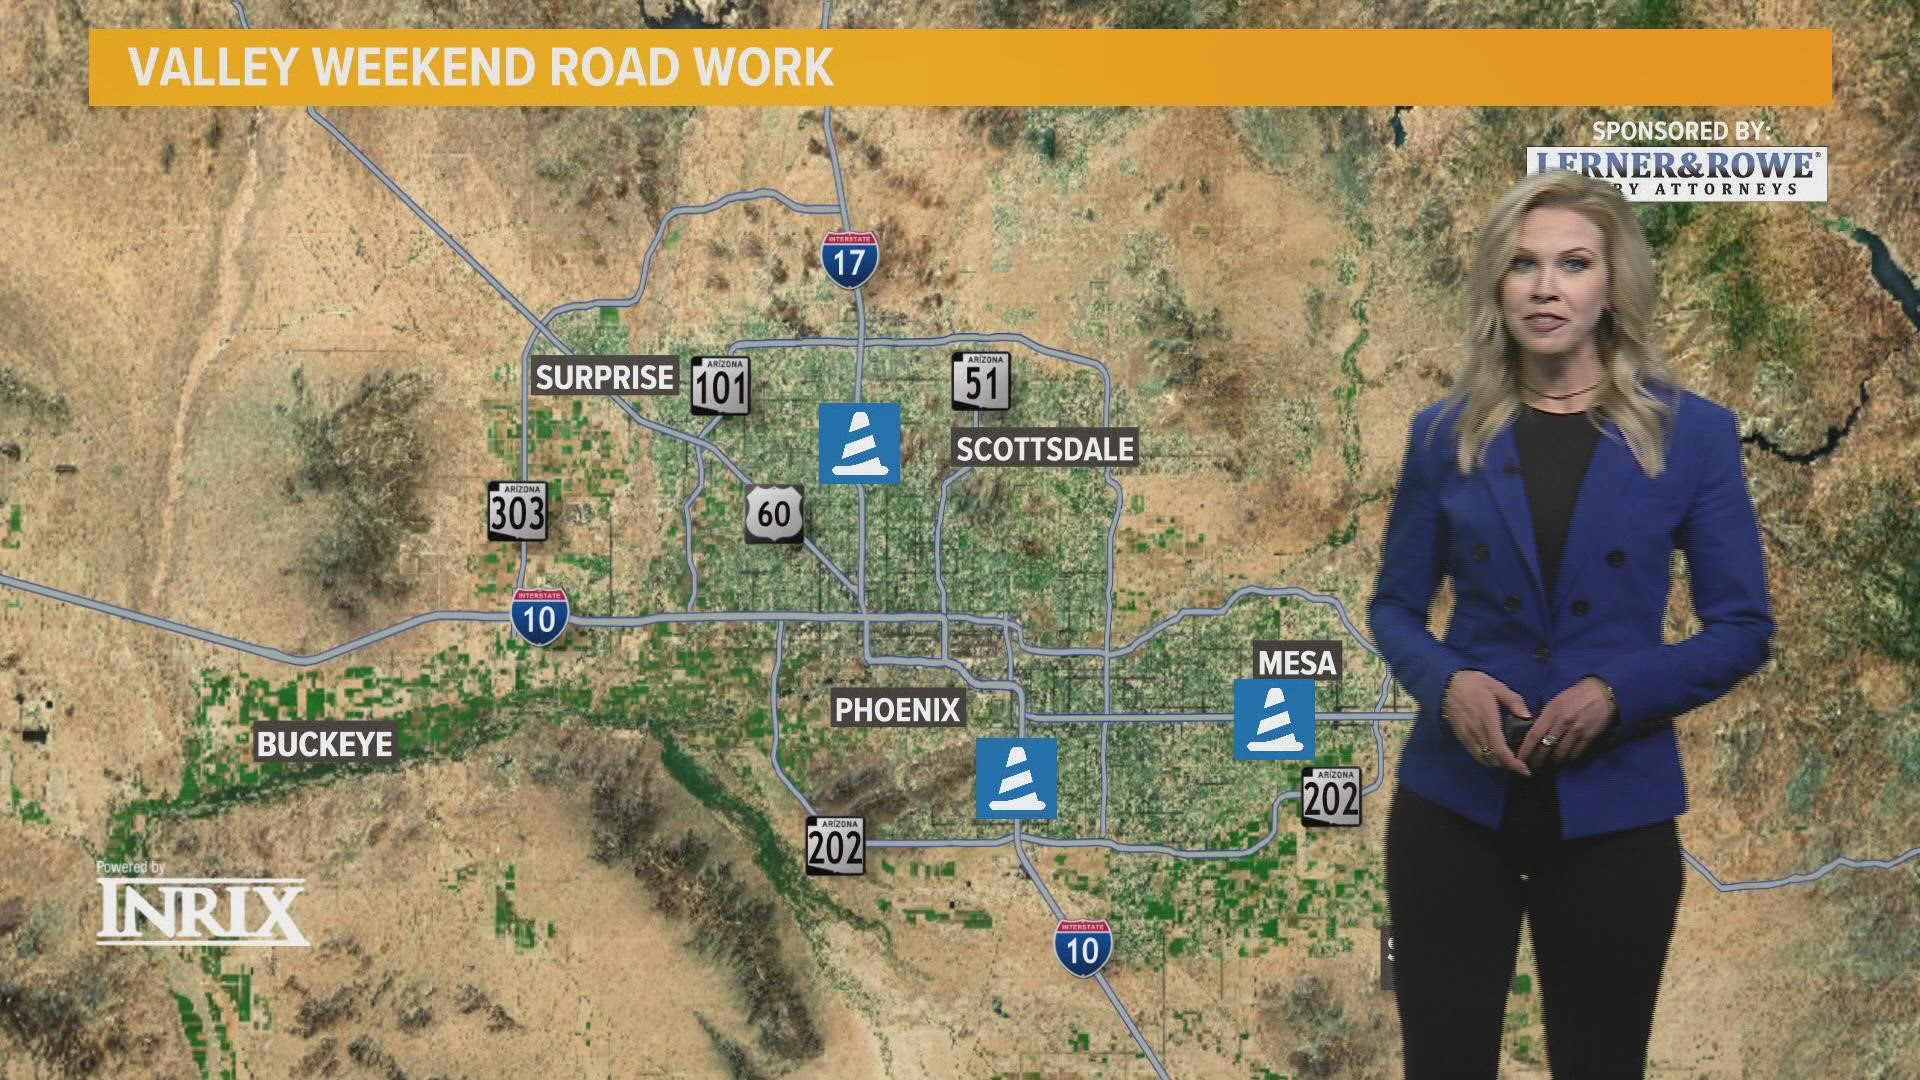 Here’s a look at those road projects that will affect your weekend commute around the Valley and Greater Arizona starting Friday, Jan. 27, to Monday, Jan. 30.